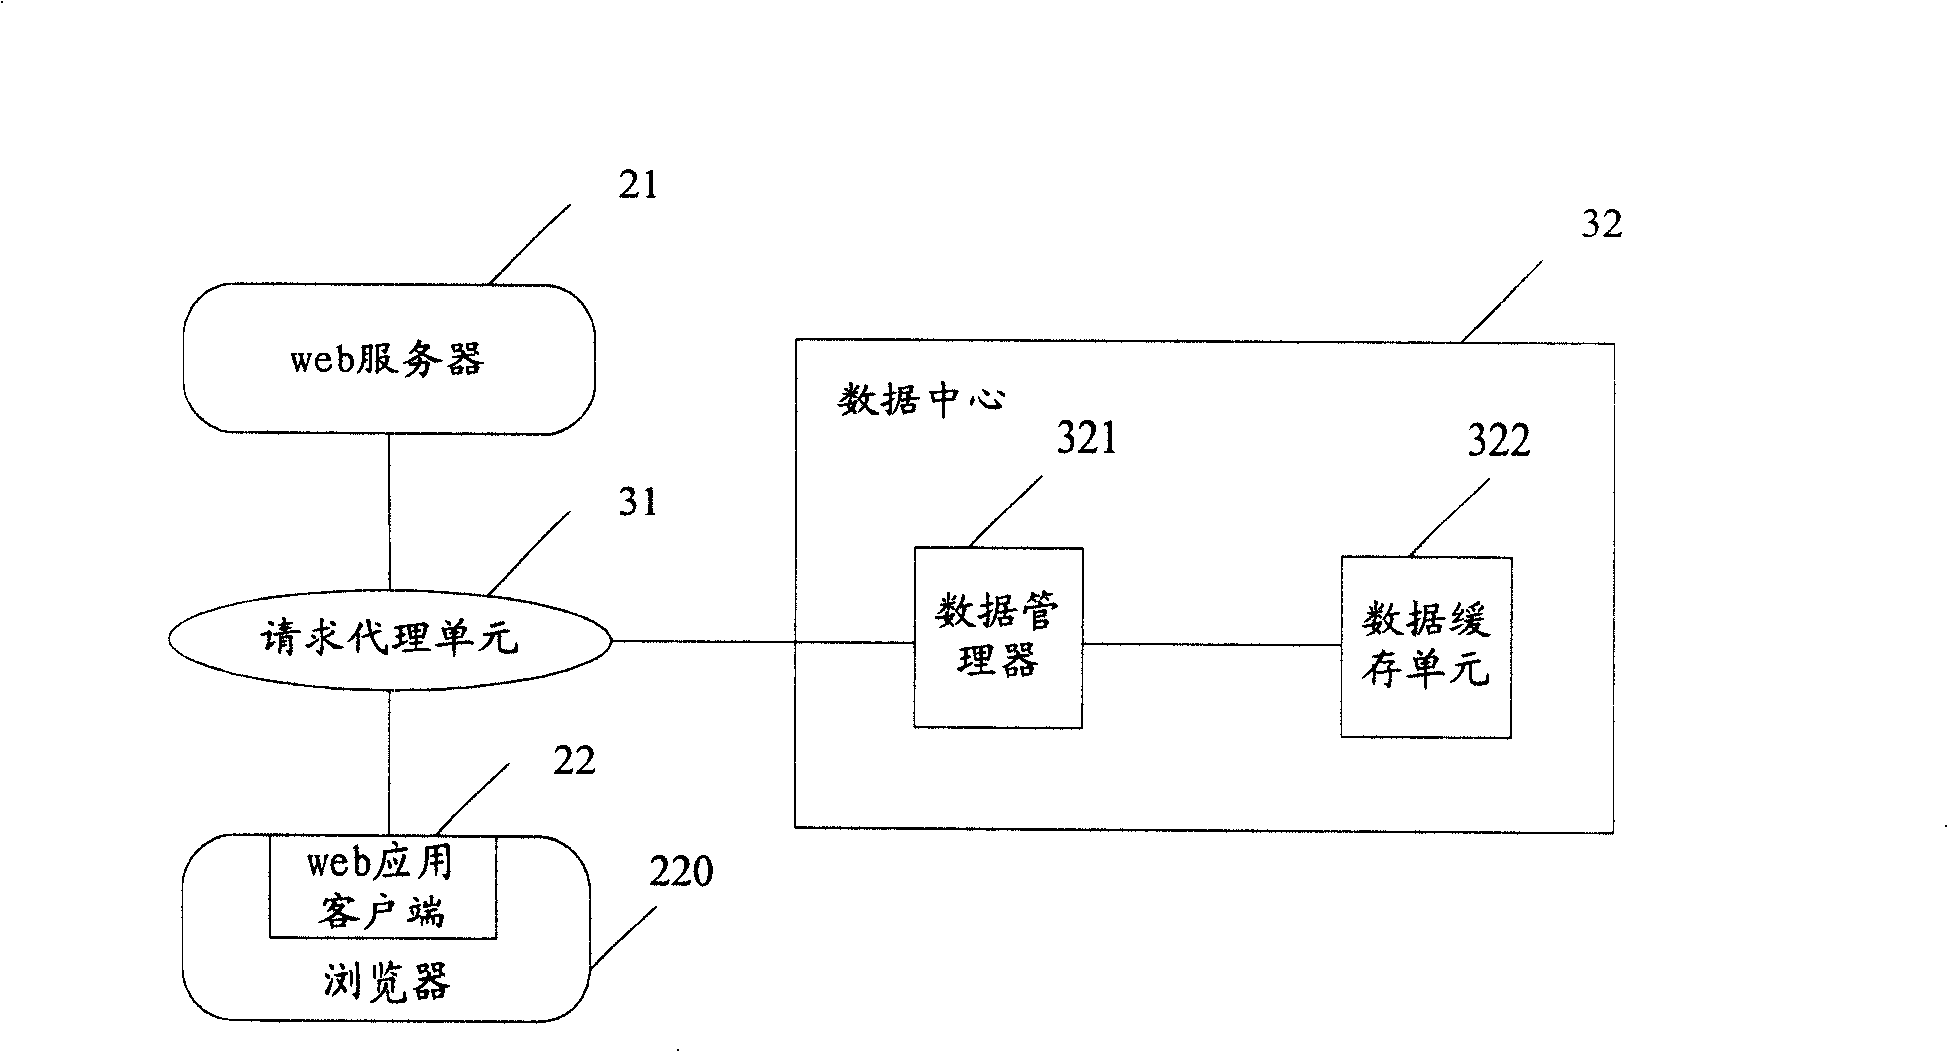 Web applied system and method